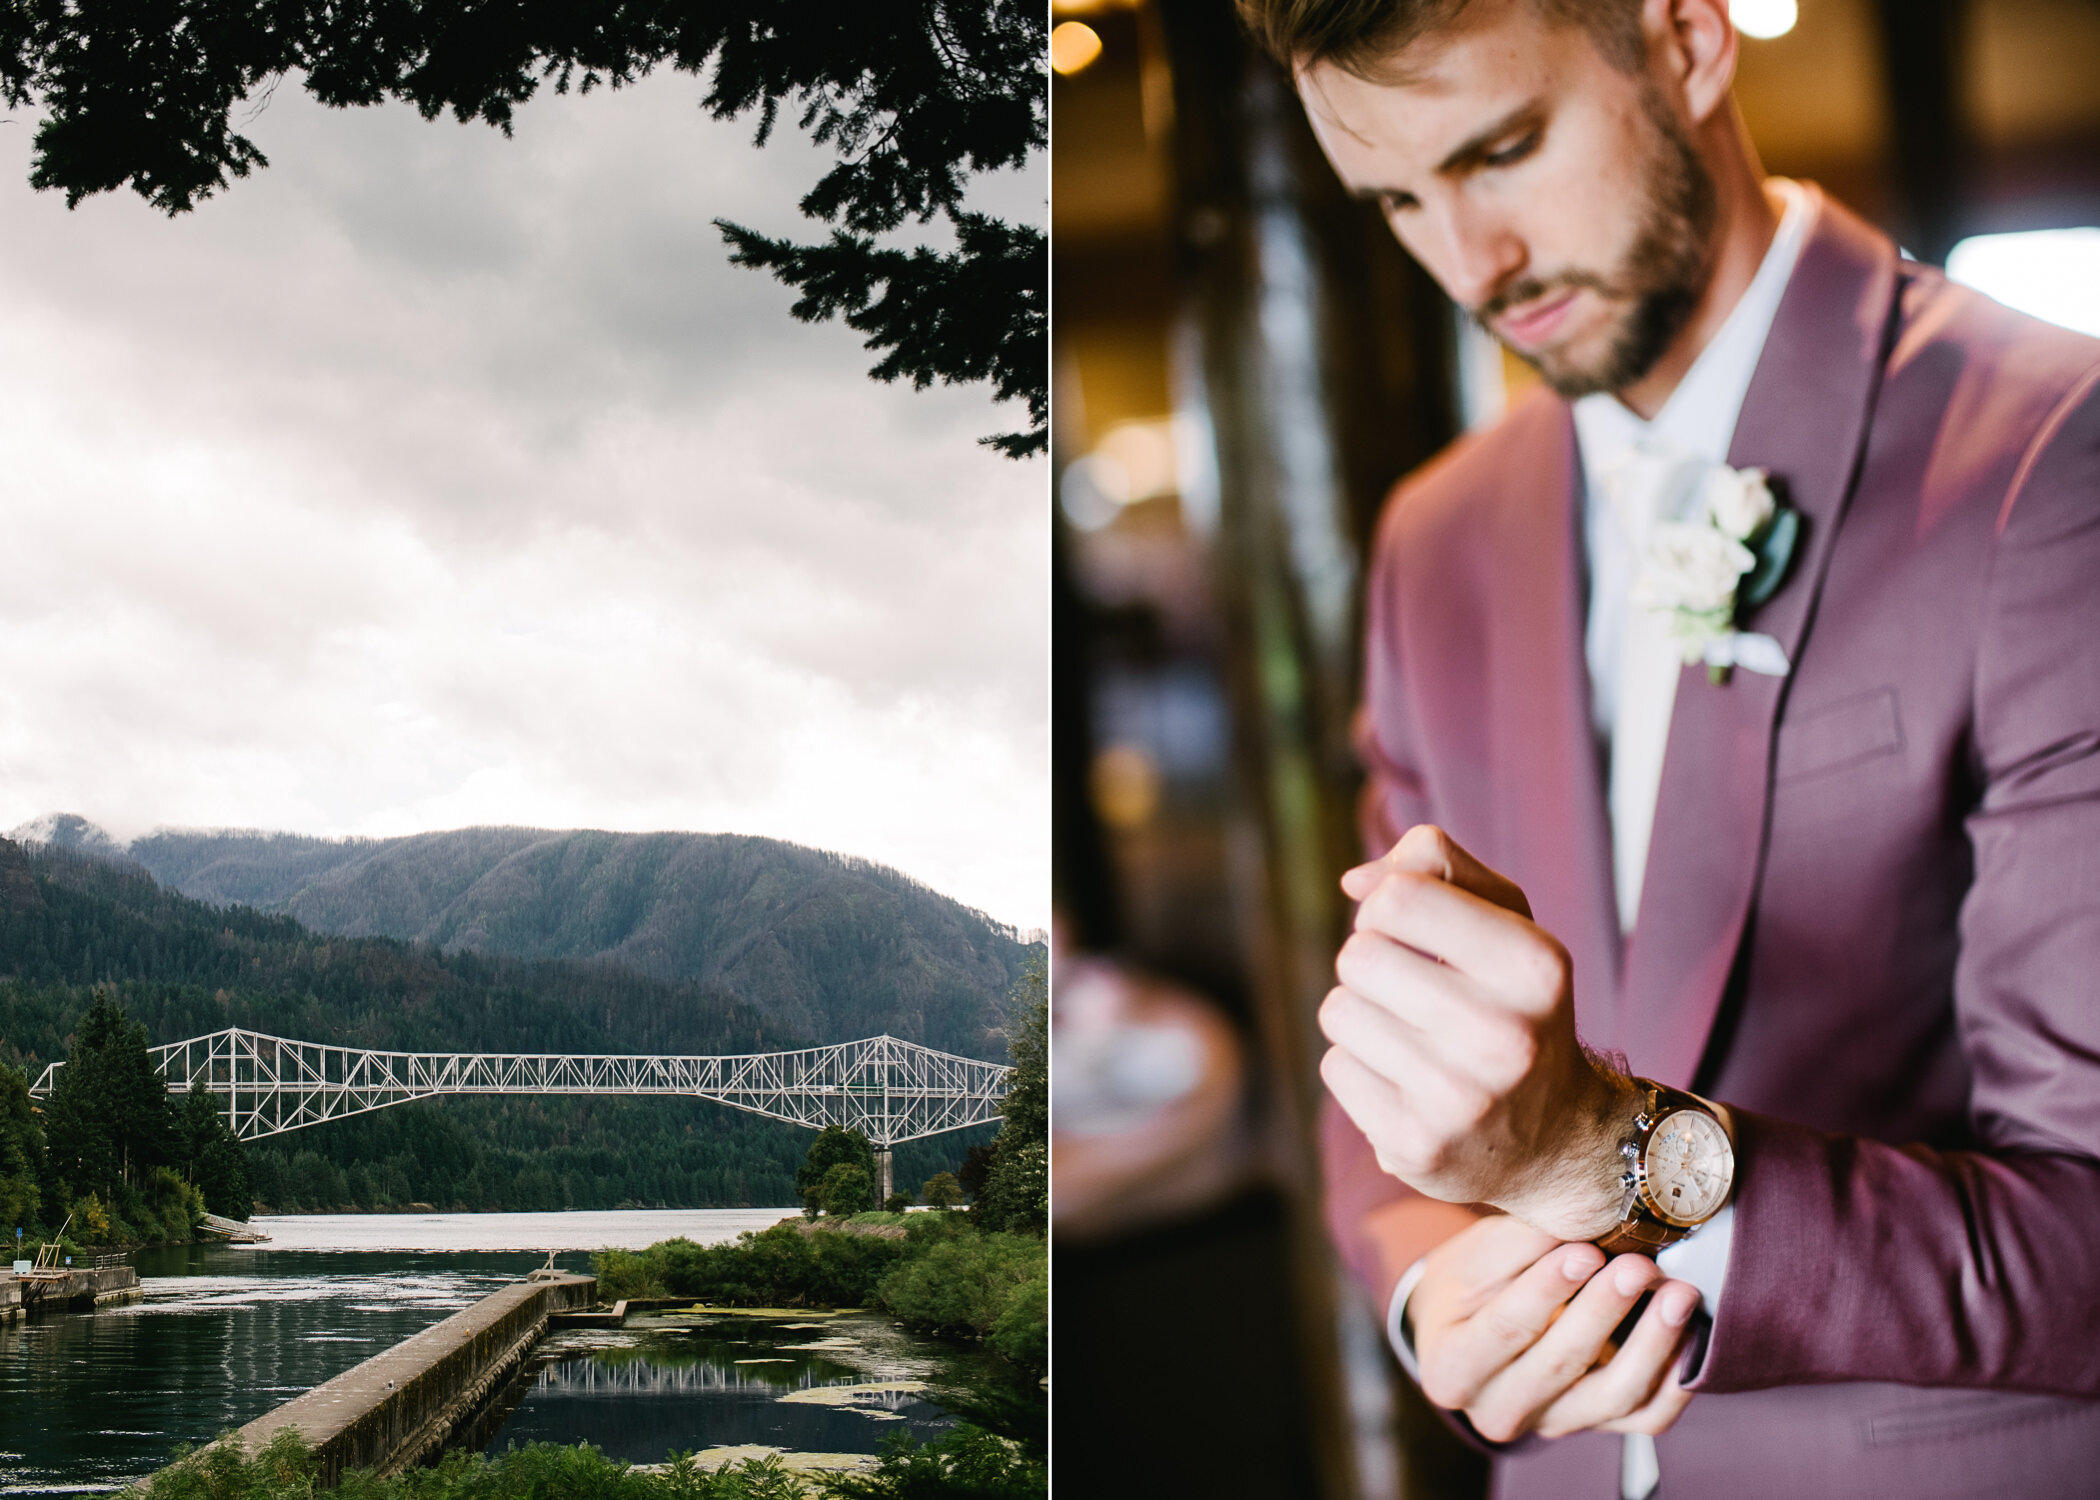  Groom in purple suit puts on watch with the bridge of the gods 